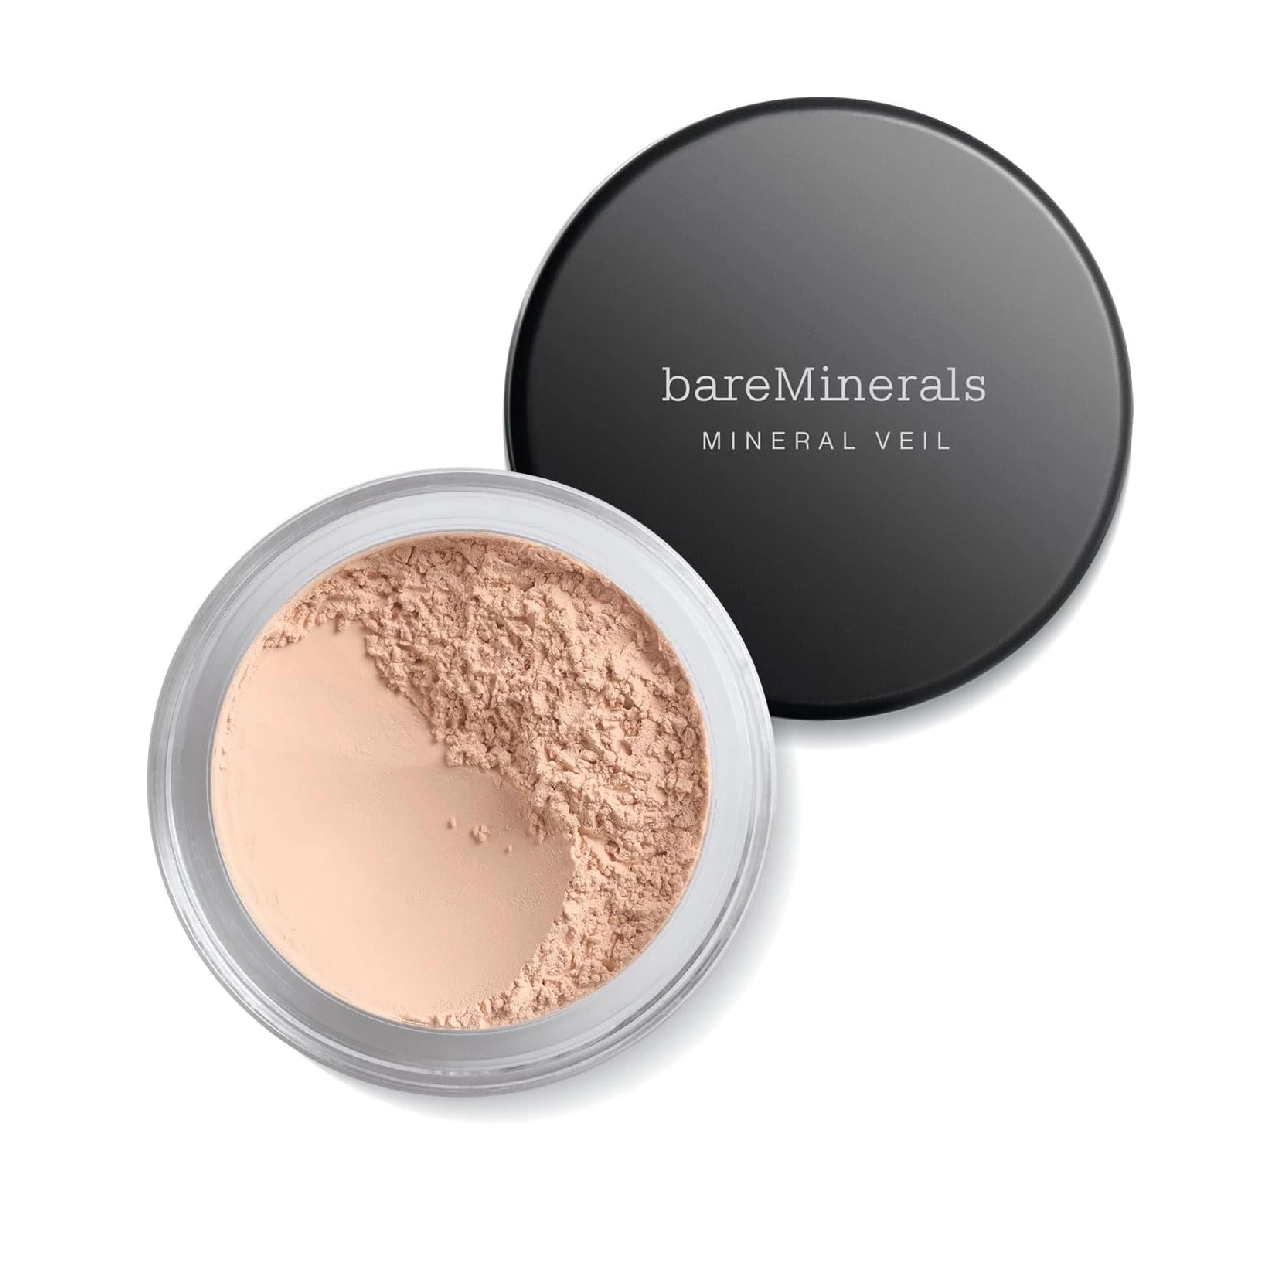 BareMinerals Mineral Veil Finishing Powder in its container on a white background